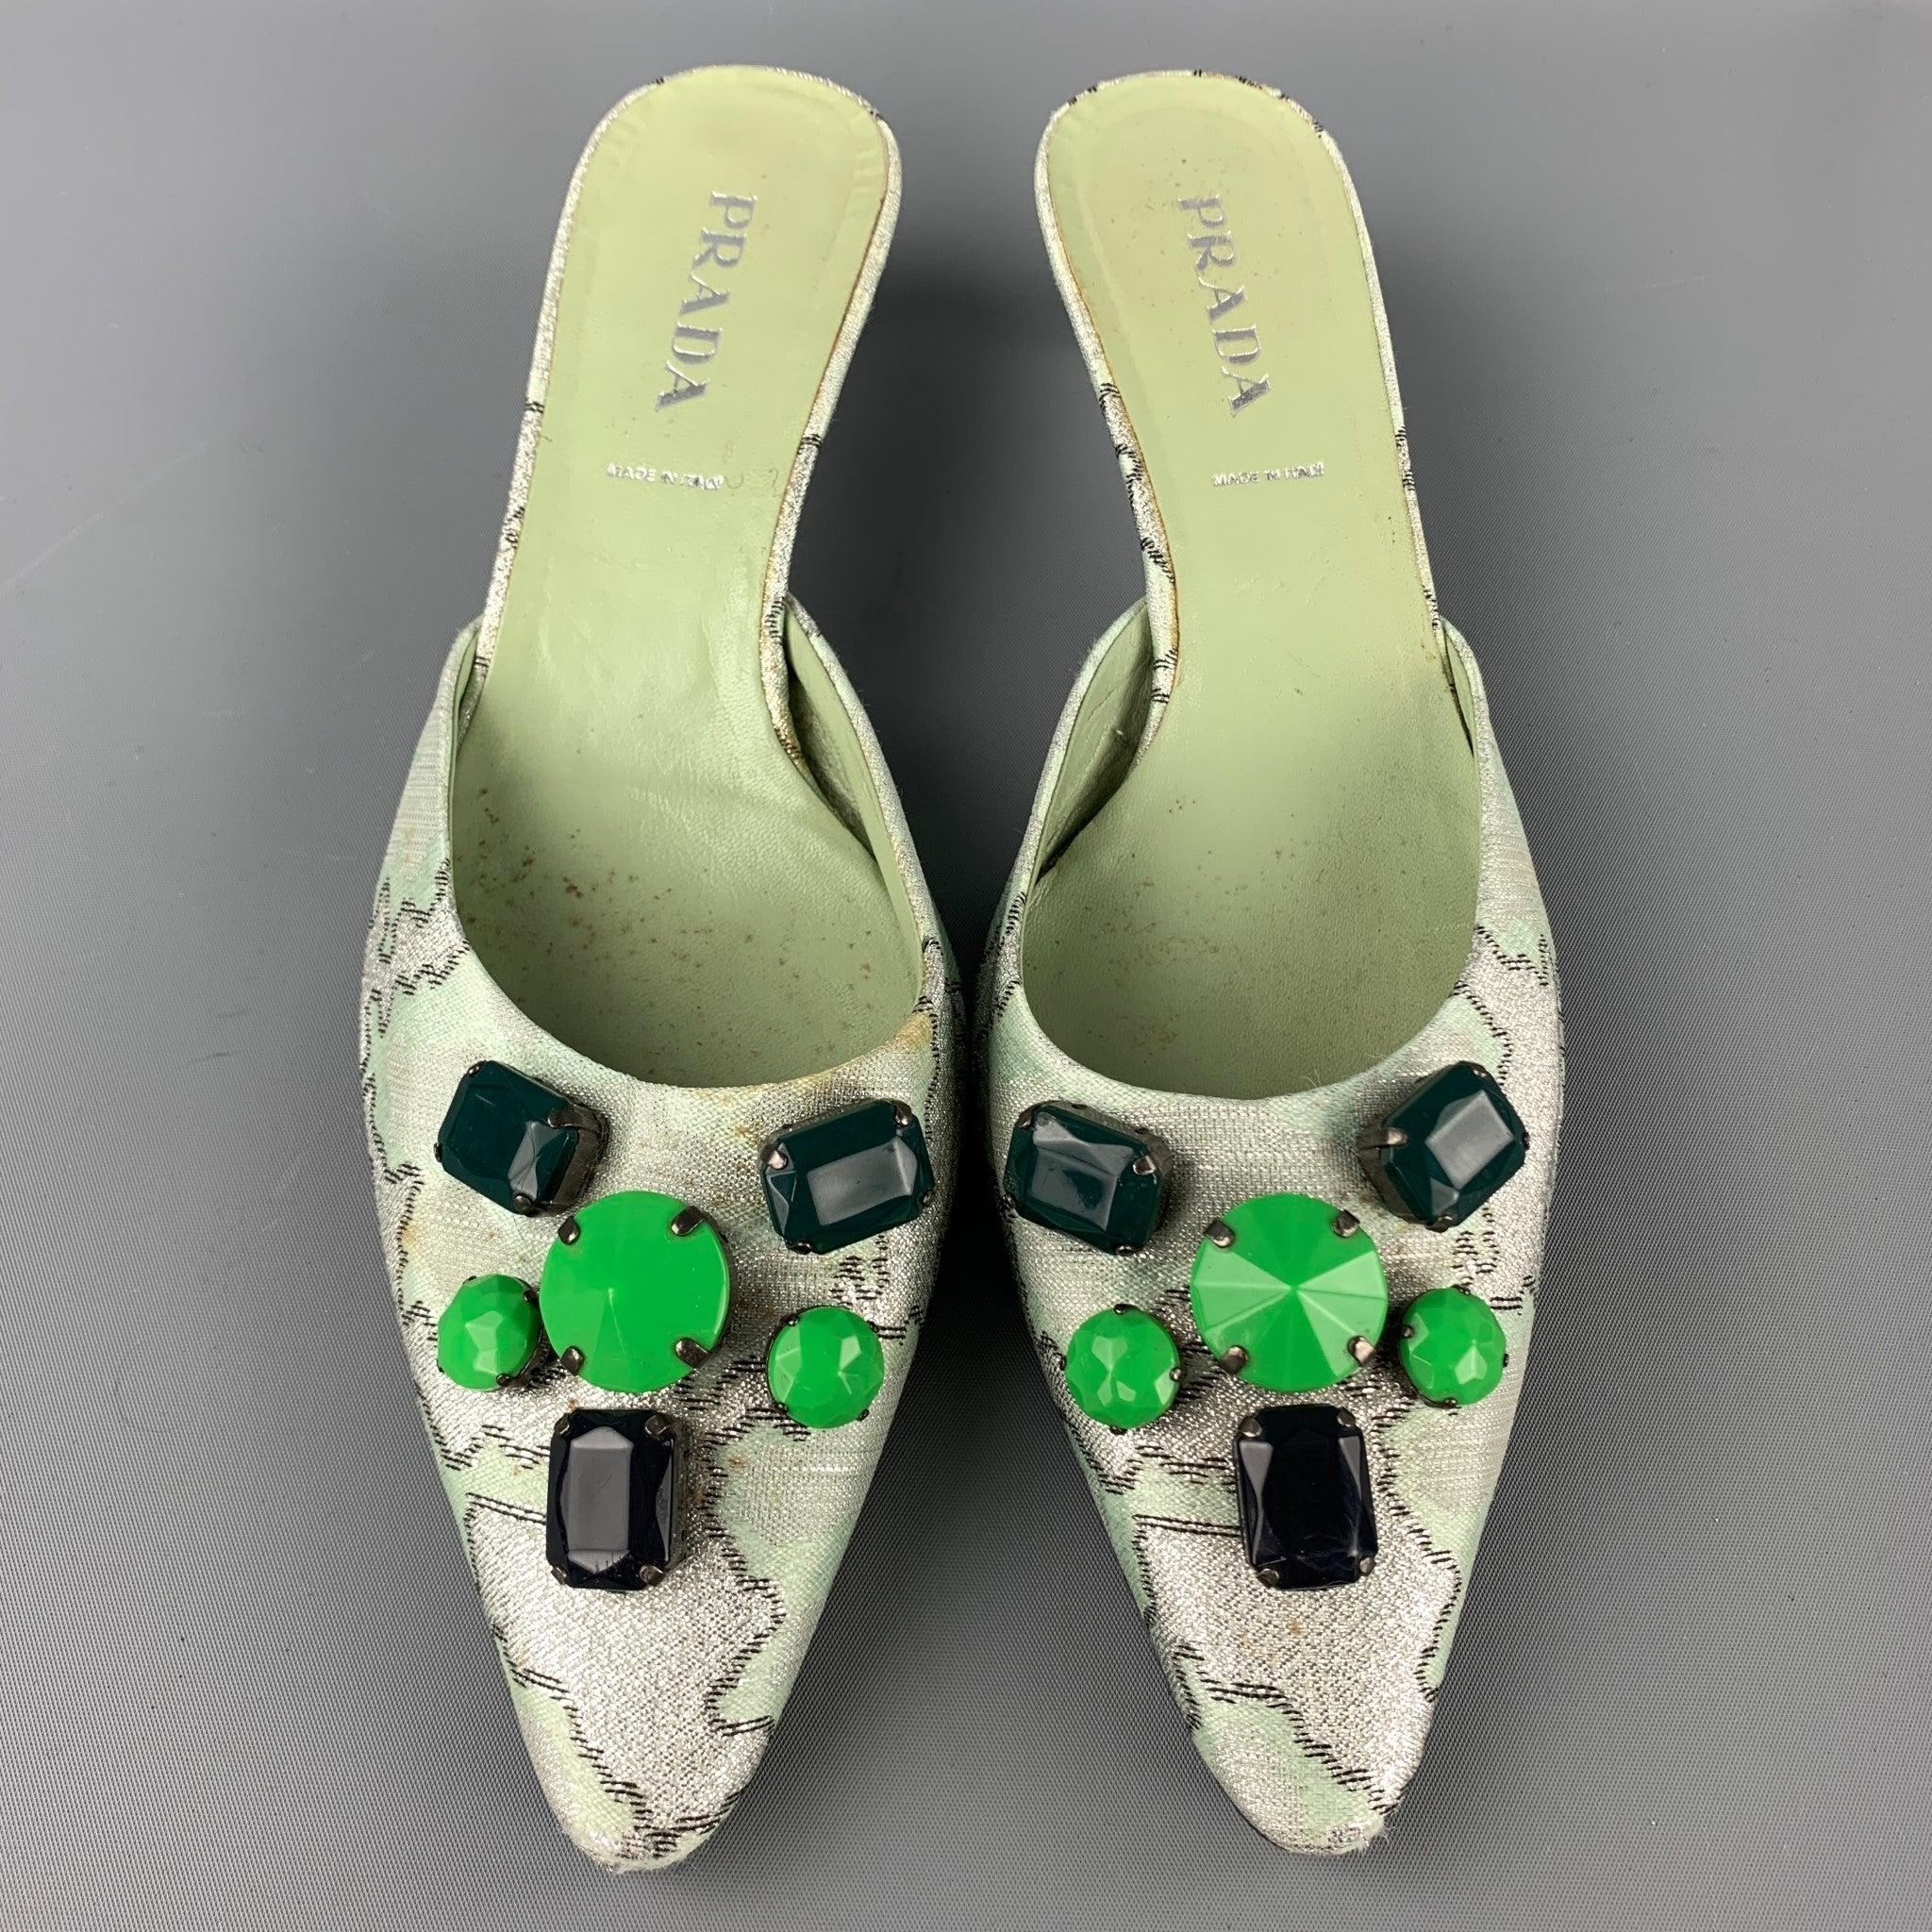 PRADA pumps comes in a green print silk with front embellishment details featuring a mule style, pointed toe, and a kitten heel. Moderate wear. Made in Italy.Good Pre-Owned Condition. 

Marked:   EU 38.5 

Measurements: 
  Heel: 2 inches 
  
  
